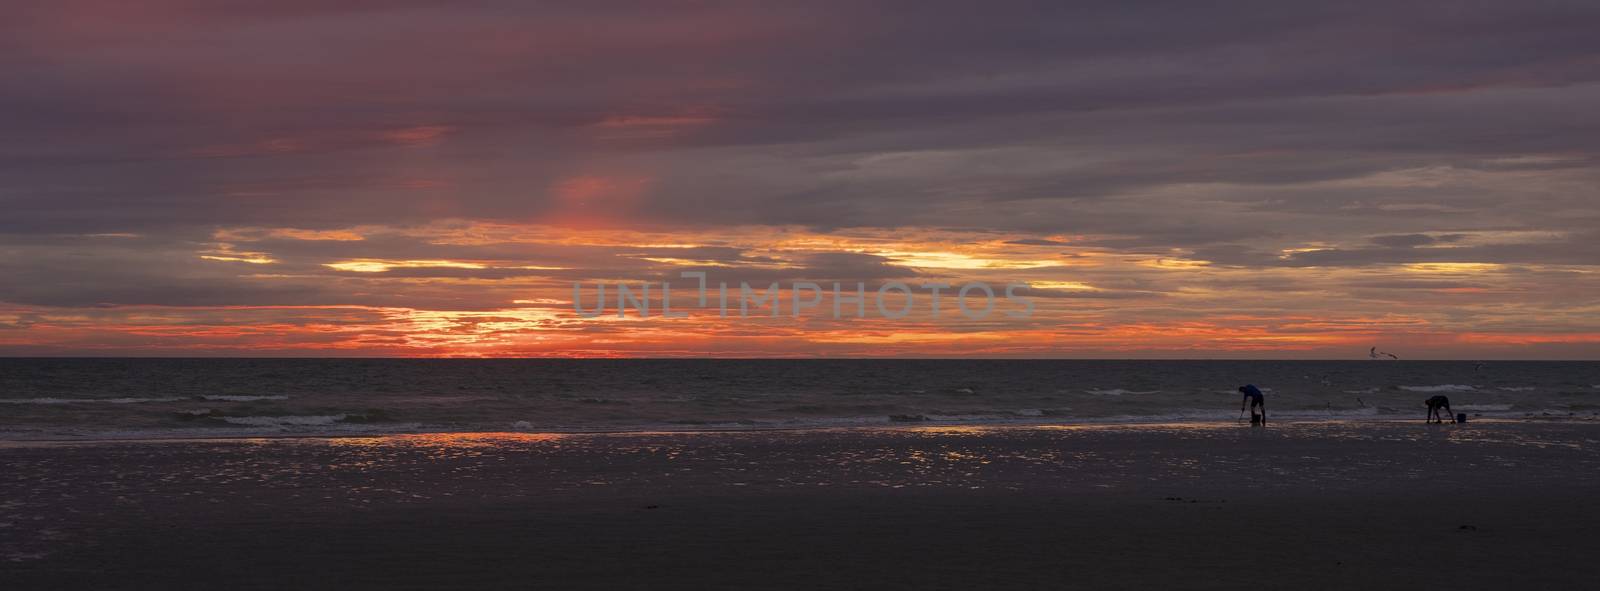 men on normandy beach during sunset look for worms to use as bait for fishing by ahavelaar